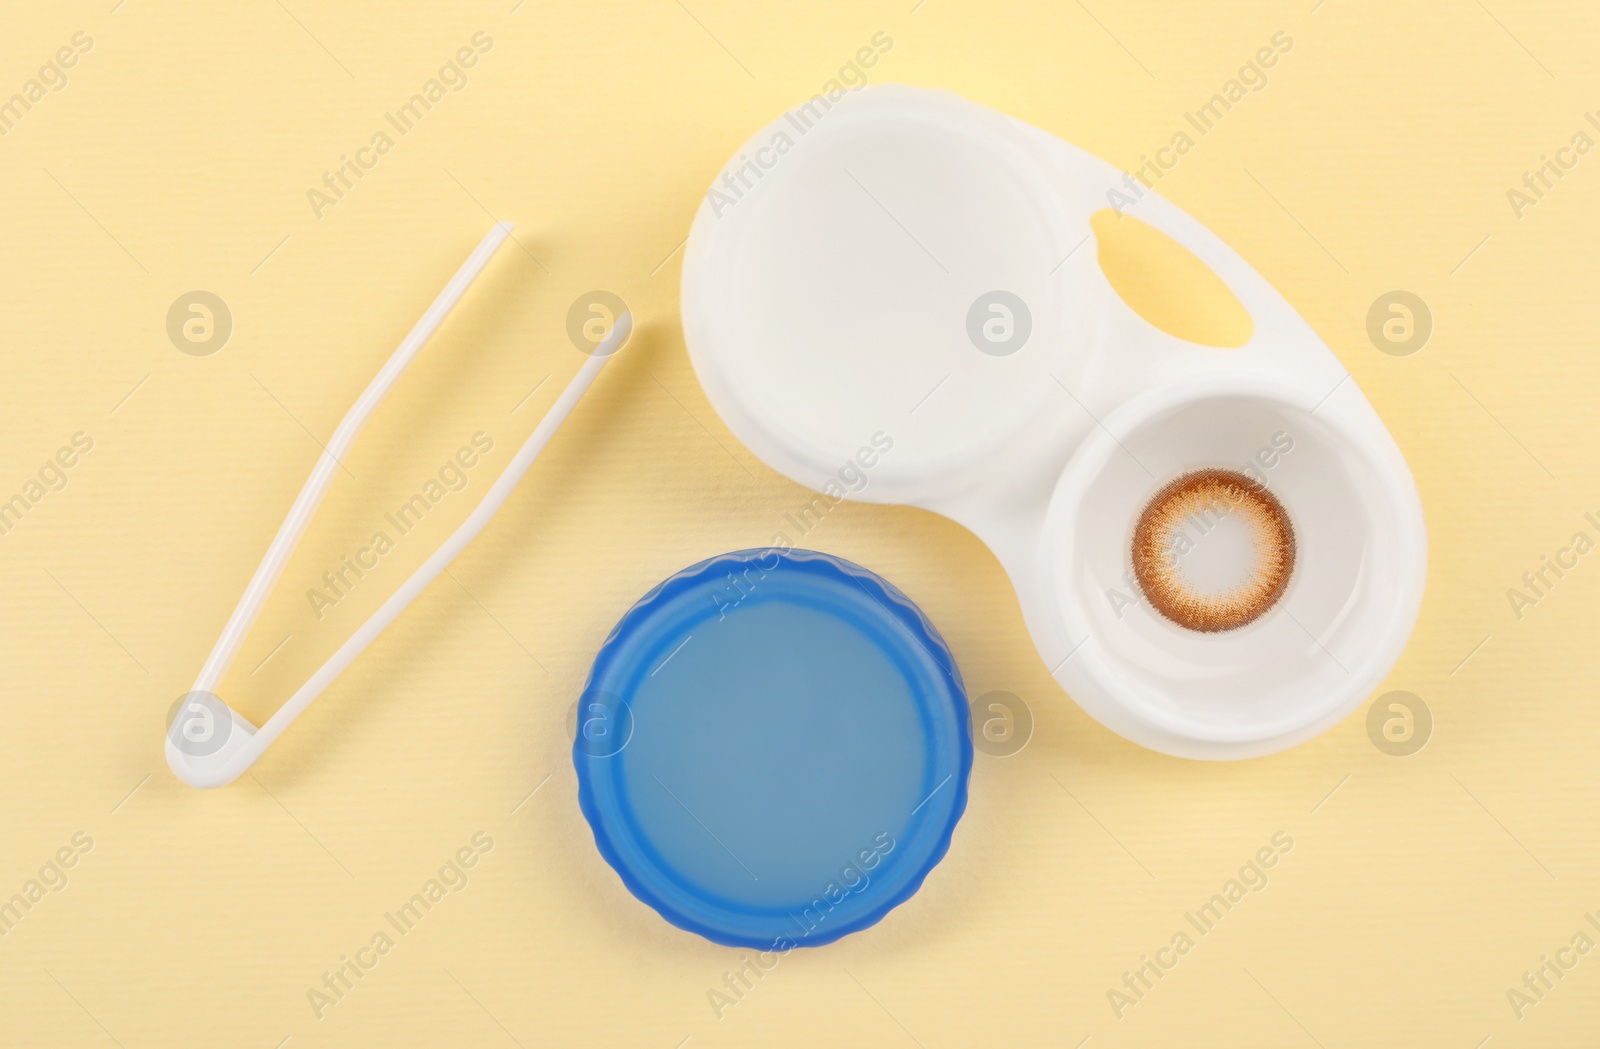 Photo of Case with color contact lenses and tweezers on pale yellow background, flat lay